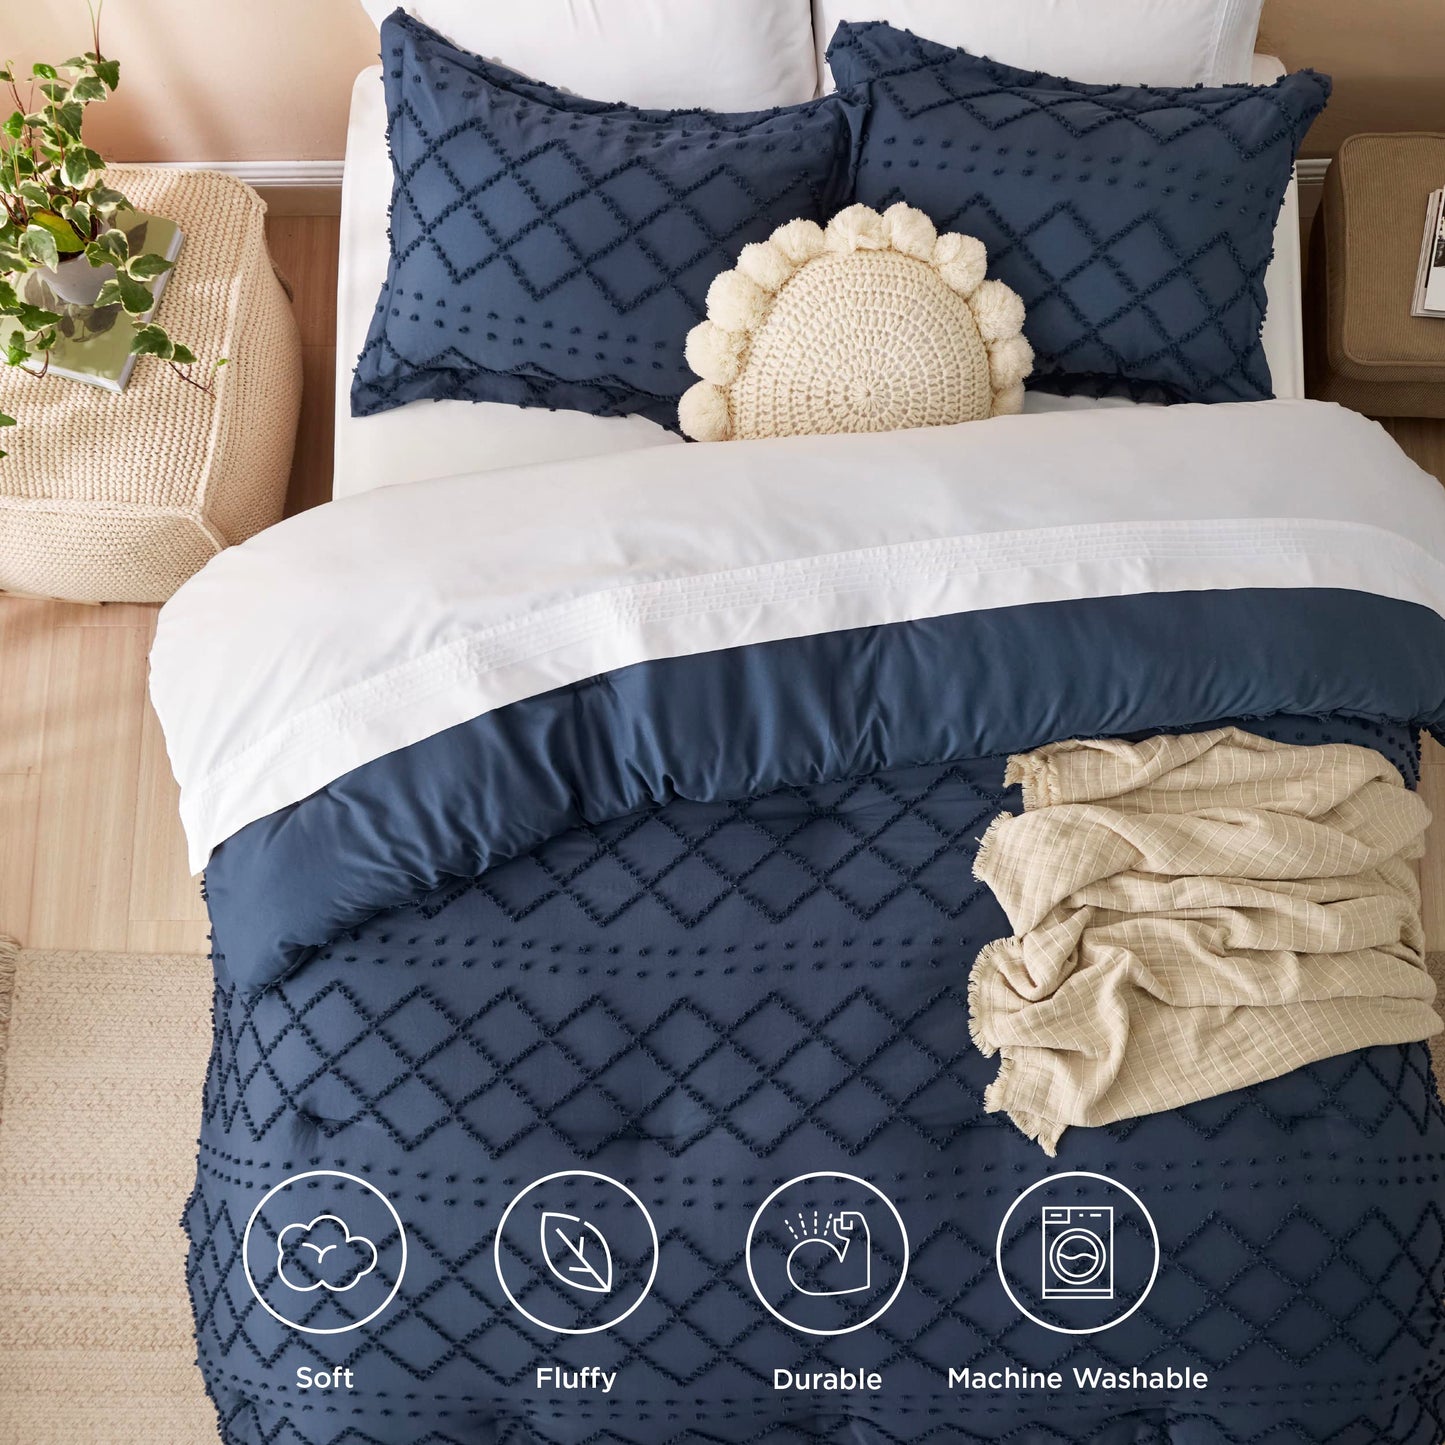 Bedsure Queen Comforter Set - Navy Blue Comforter, Boho Tufted Shabby Chic Bedding Comforter Set, 3 Pieces Vintage Farmhouse Bed Set for All Seasons, Fluffy Soft Bedding Set with 2 Pillow Shams